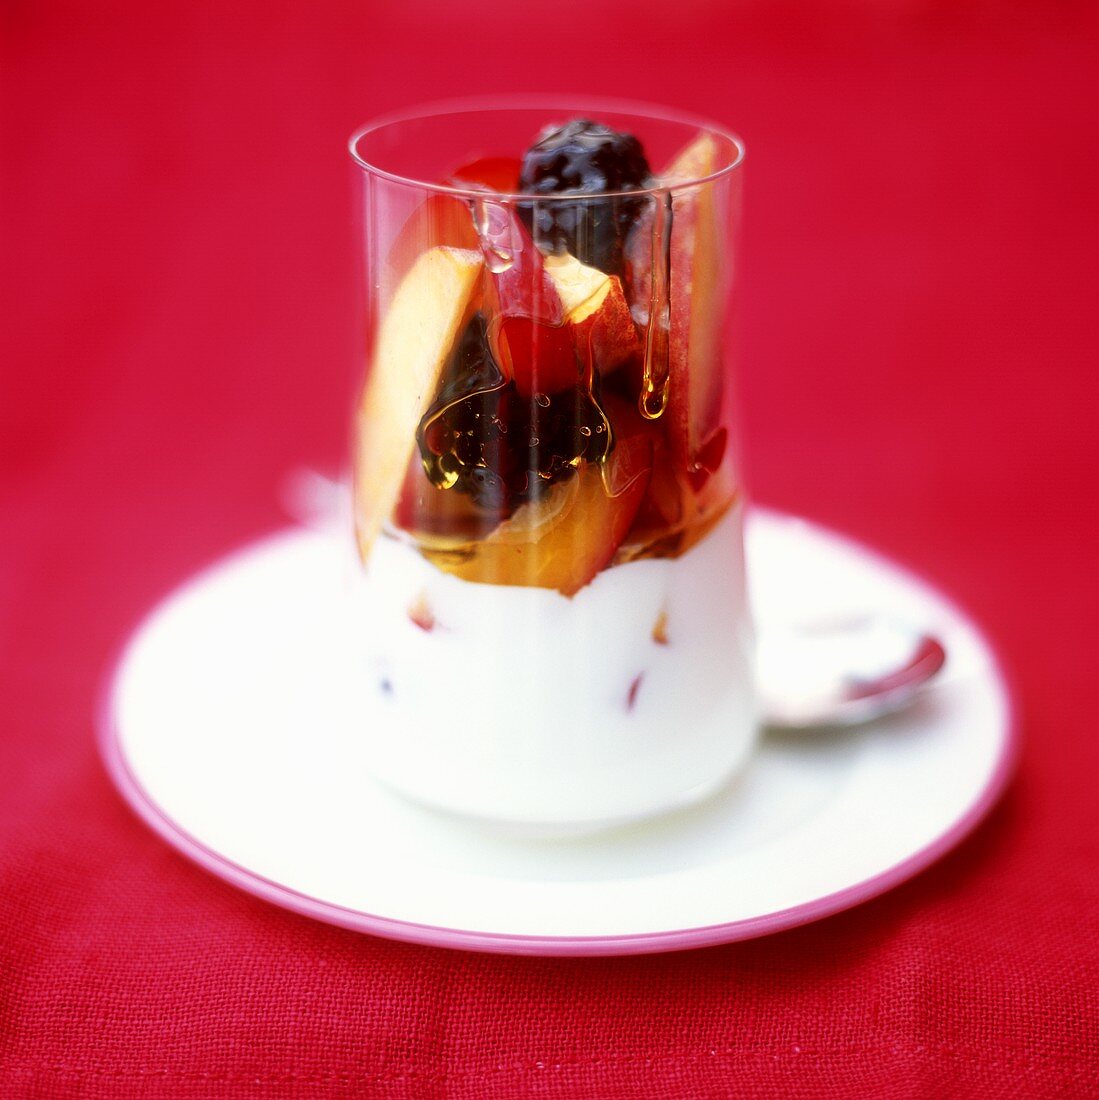 Creamy yoghurt with fruit and honey in a glass